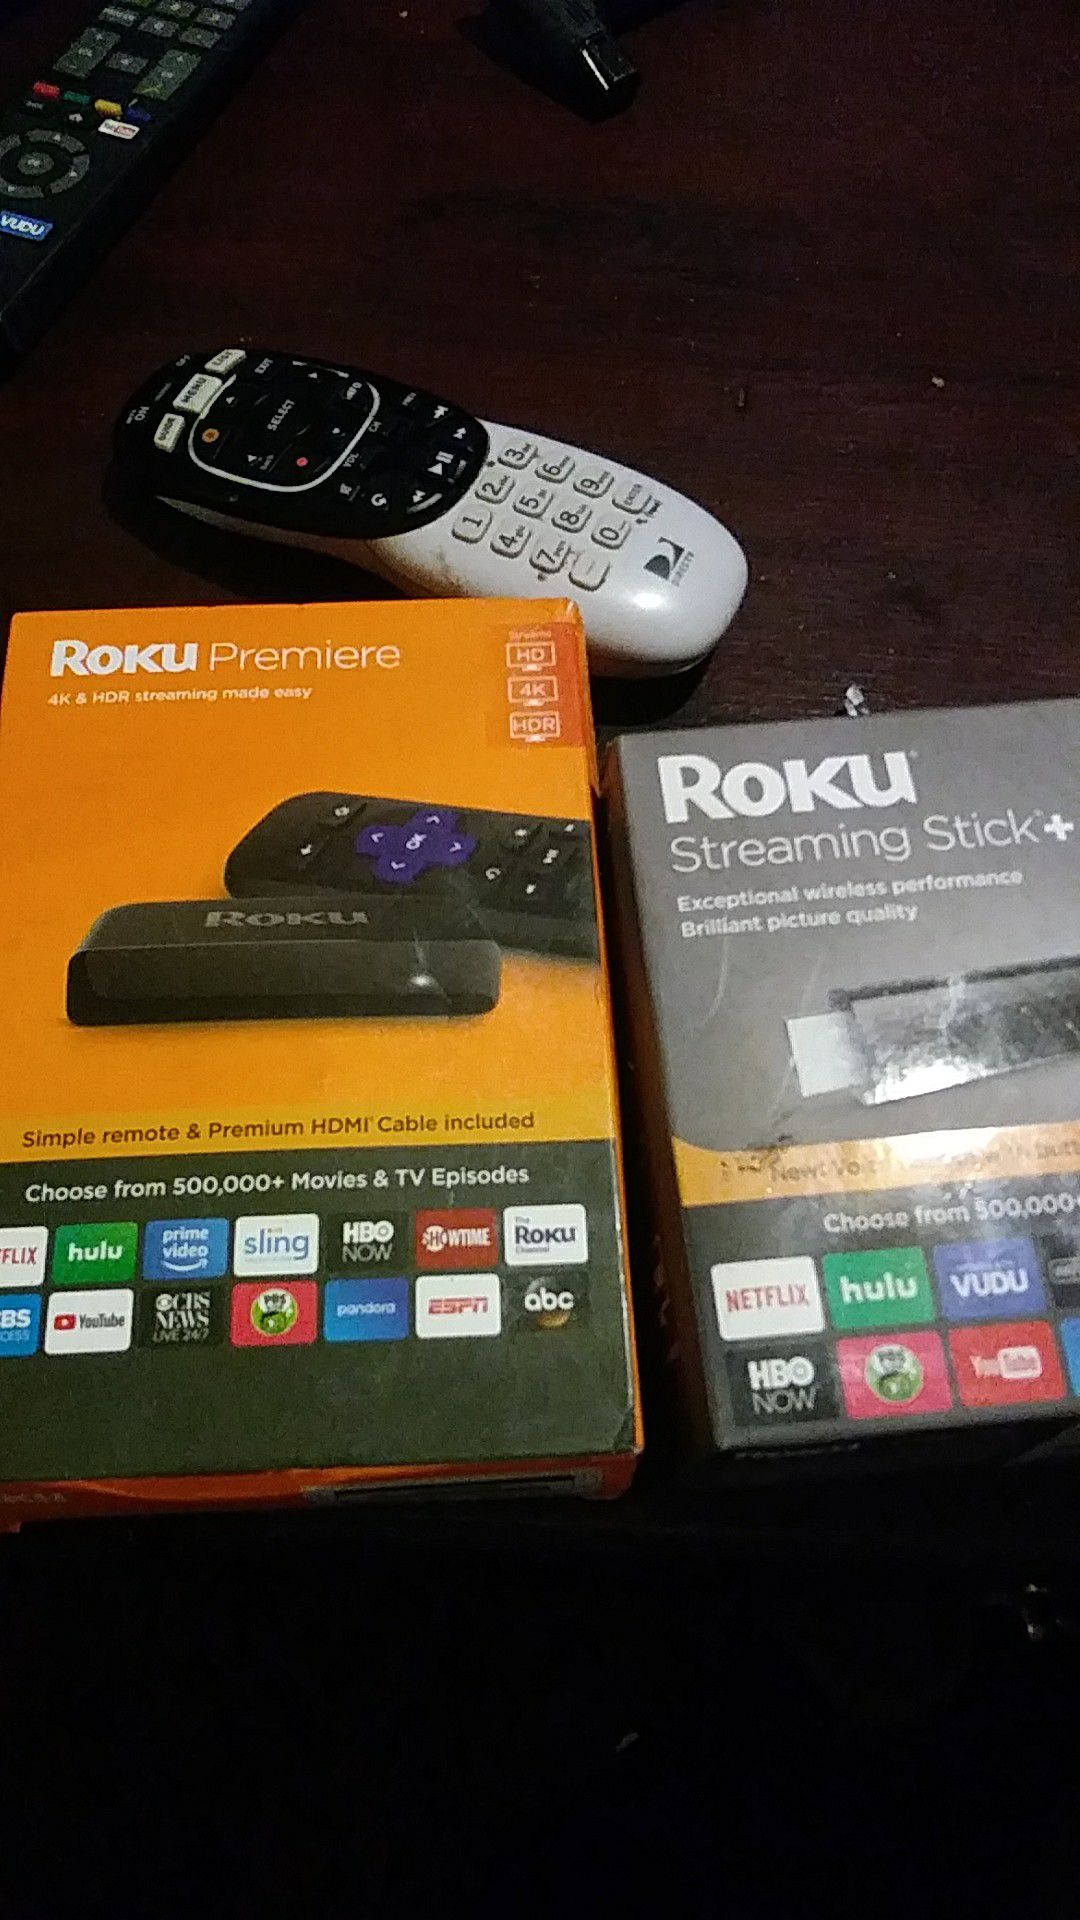 Brand new never opend roku premiere and stick